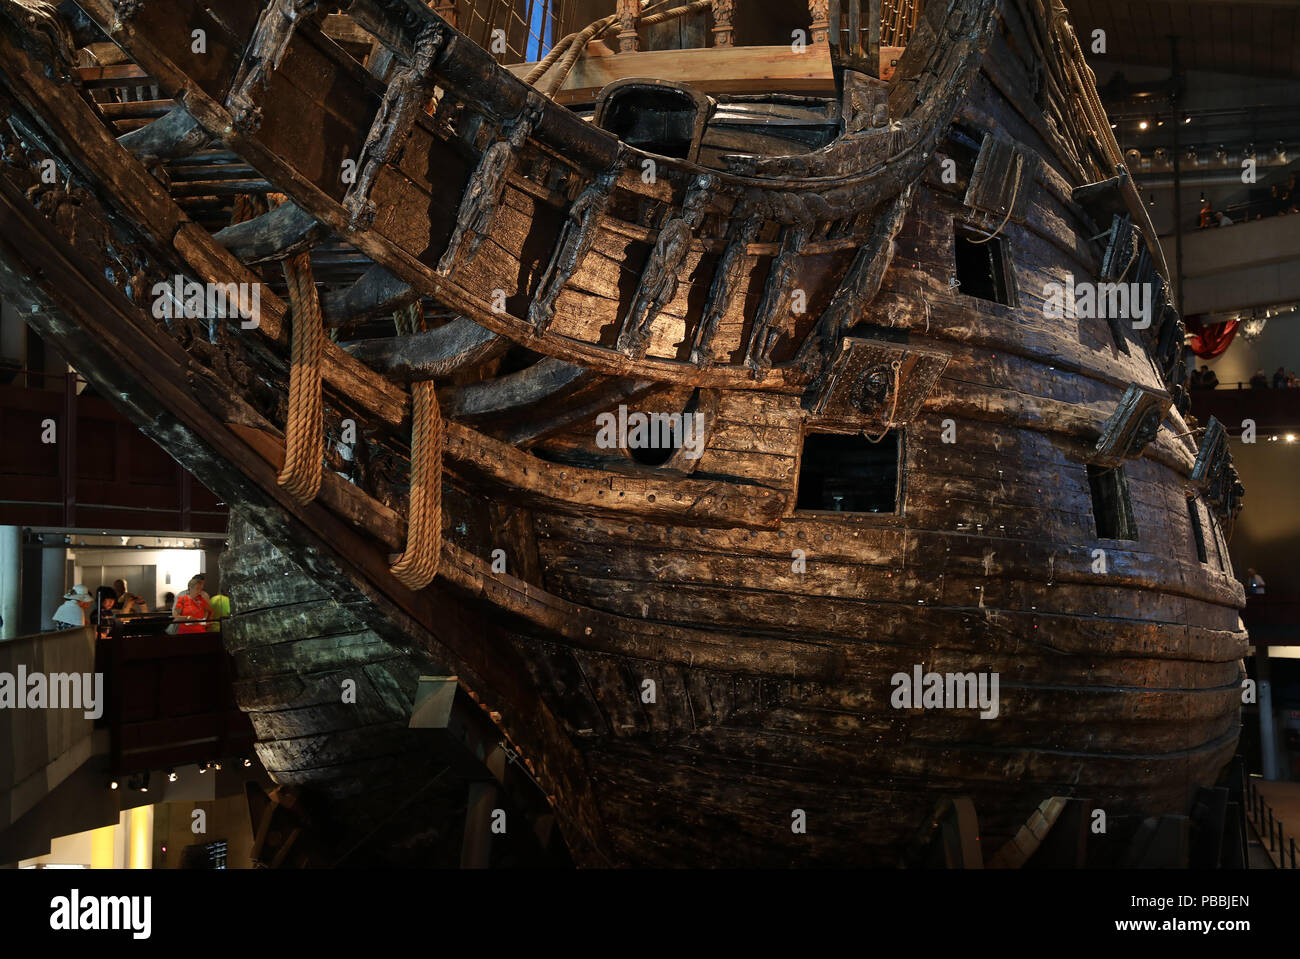 Vasa the Swedish Flagship of King of Sweden Gustavus Adolphus which foundered on her maiden journey on the 10 August 1628 Stock Photo